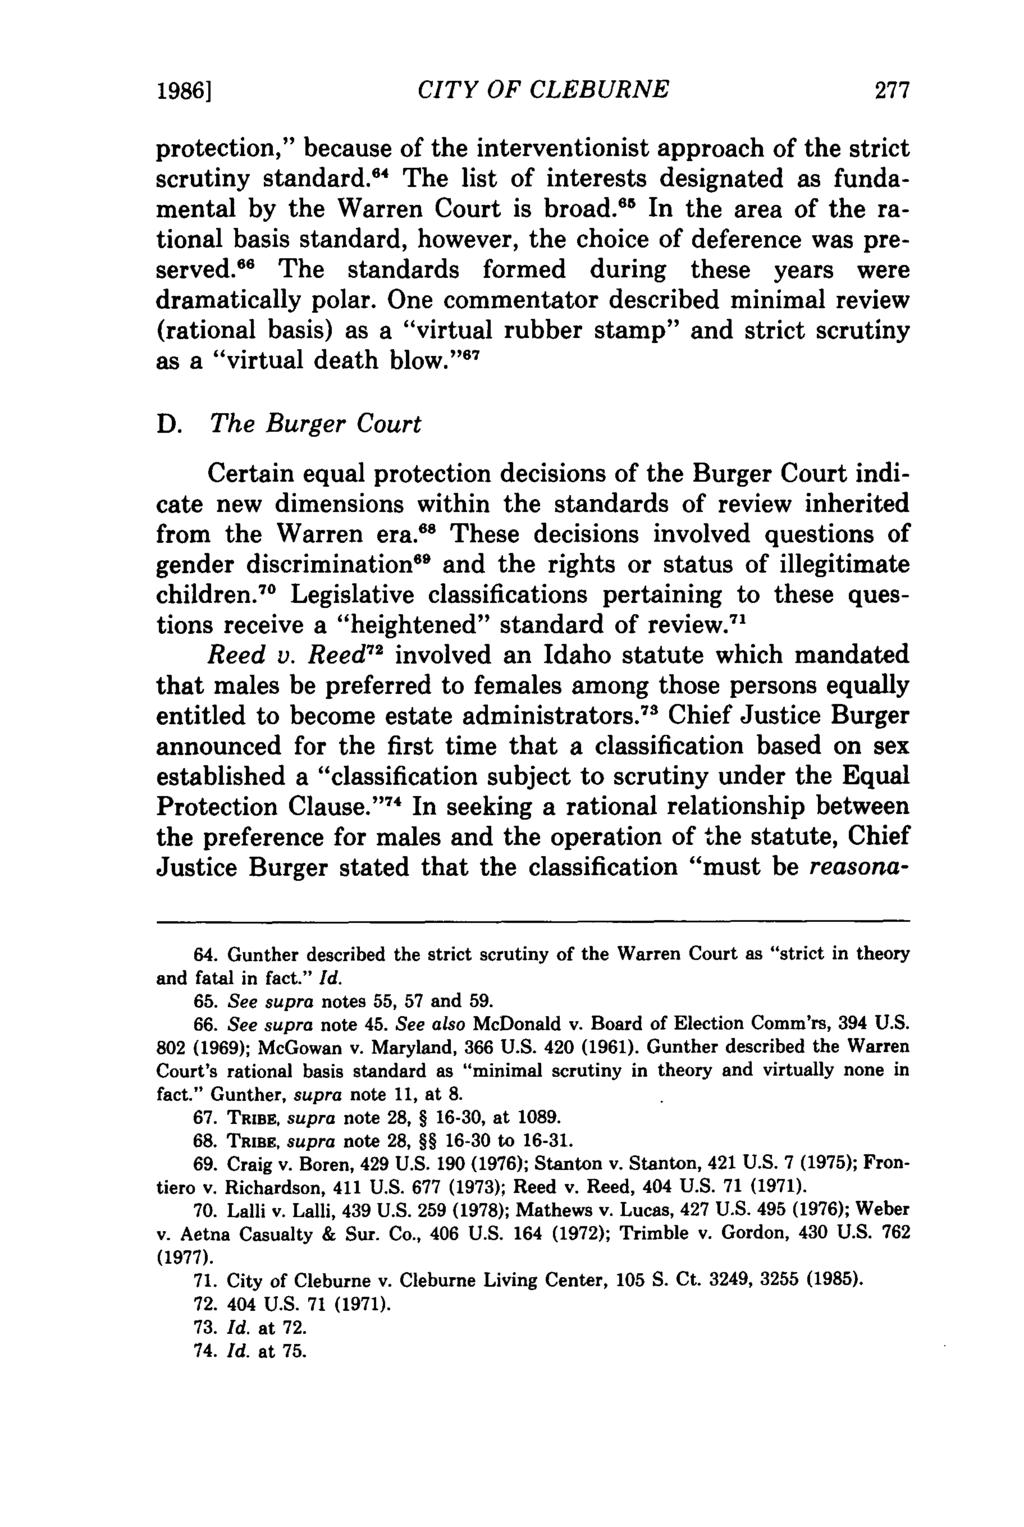 1986] CITY OF CLEBURNE protection," because of the interventionist approach of the strict scrutiny standard. 64 The list of interests designated as fundamental by the Warren Court is broad.